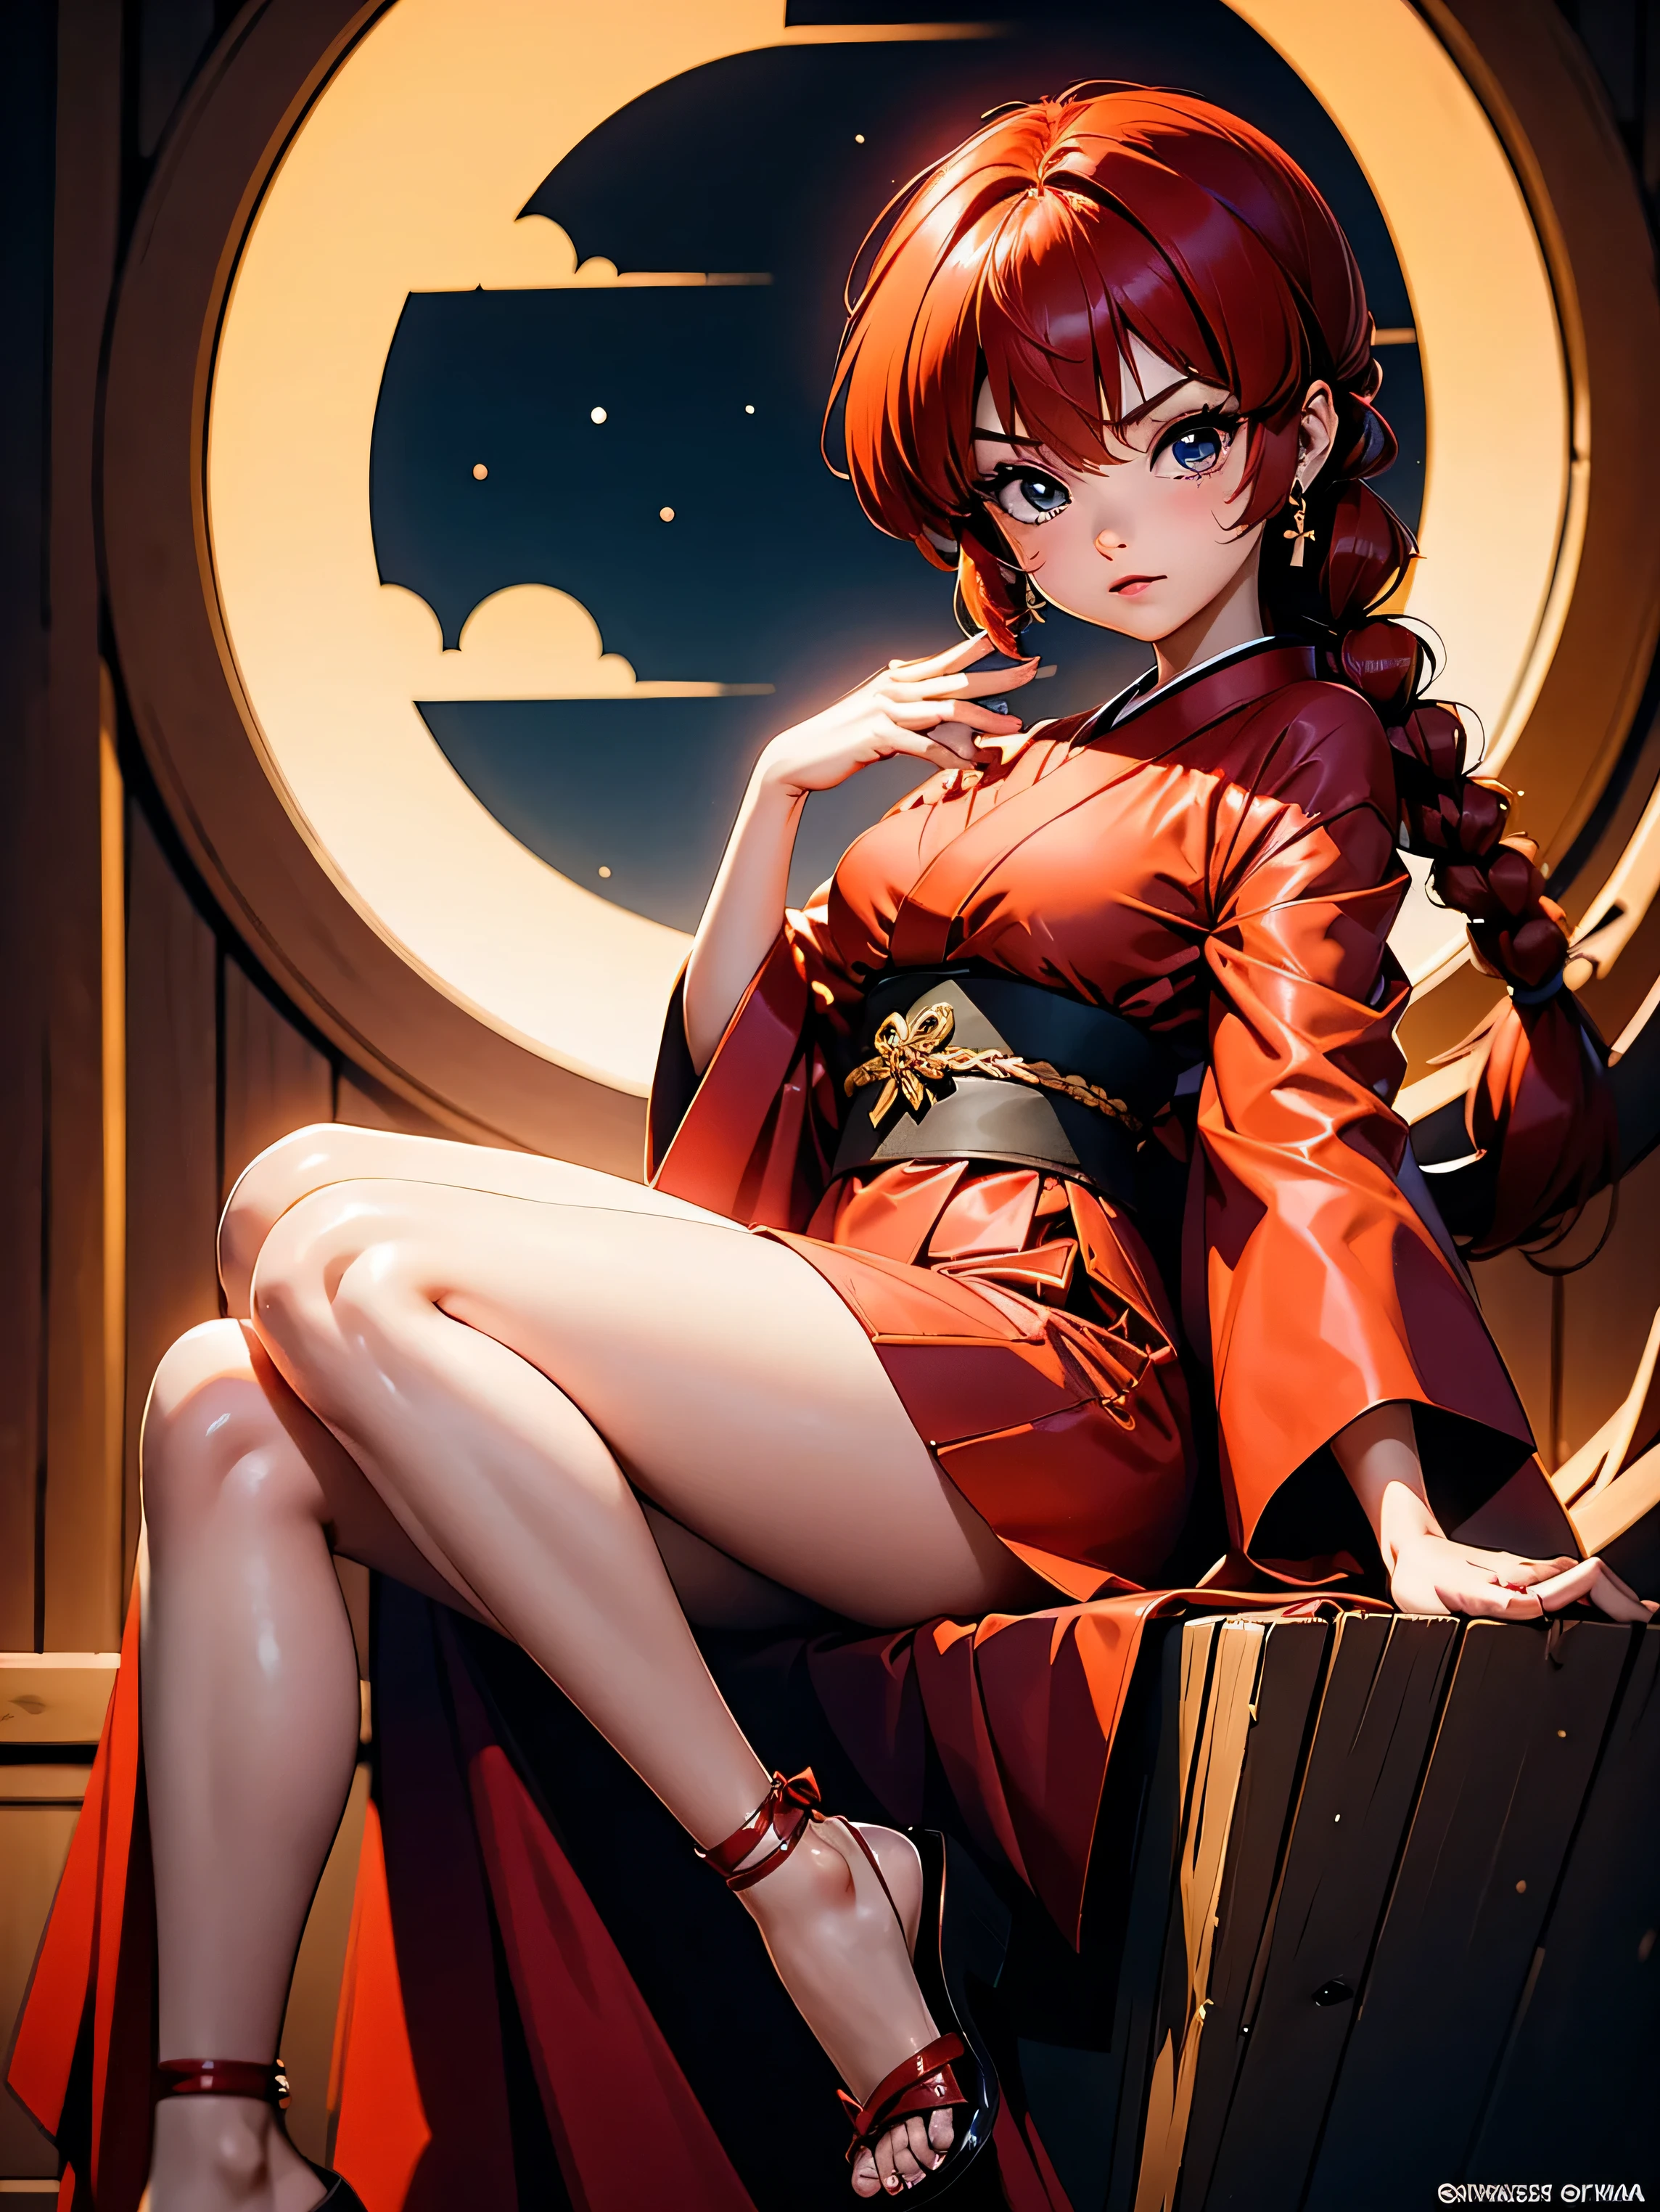 Redhead anime girl with fixed ears and wearing red kimono, 16 yrs old, Body cute, breasts big, with hands behind head, running your hands through your hair, sexy girl, red short hair with braid, side hair highlights, locks of hair on the side of the face, beautiful lighting, softshadows, blue colored eyes, pretty legs, short hair with braid, anime styling, ranma chan, Autora Rumiko Takahashi, Based on a work by Rumiko Takahashi, Anime Ranma 1/ 2, decote sexy, robust hip, fully body, fully body, Bust Big, young girl with fox ears, beautiful and beautiful body, sandals on his feet, garota 16 yrs old jovem baixa estatura, wearing red kimono, anime girl, anime styling, beautiful feet in sandals, front view angle, plein-air, red hair braid, ears fox, upright posture, eyes large, red kimono